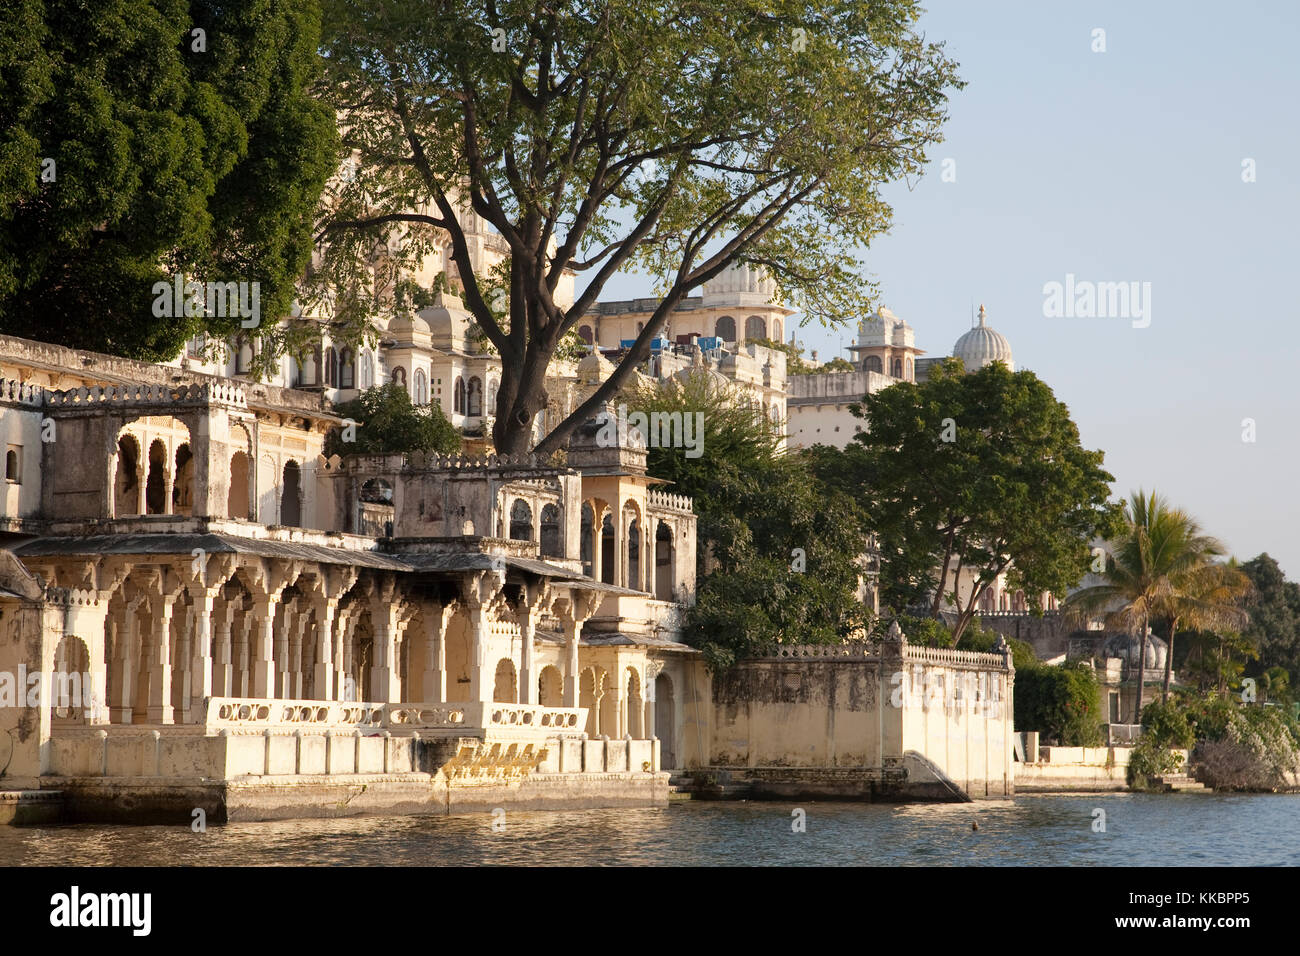 Architectural details of the City Palace seen from Lake Pichola, Udaipur, Rajasthan Stock Photo